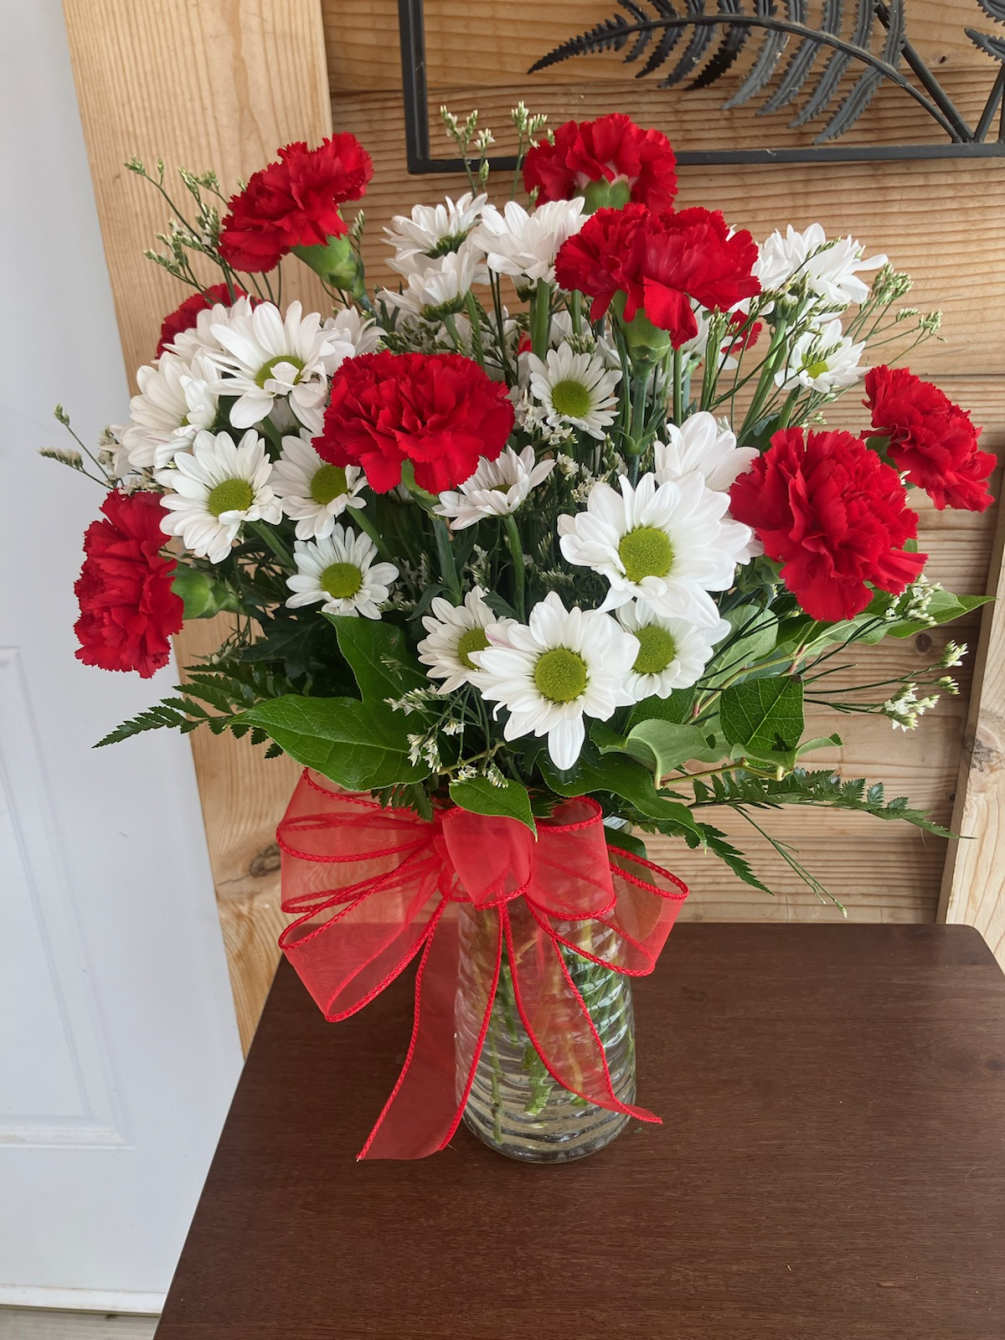 Daisies and red Carnations make this a great arrangement for your sweetheart!